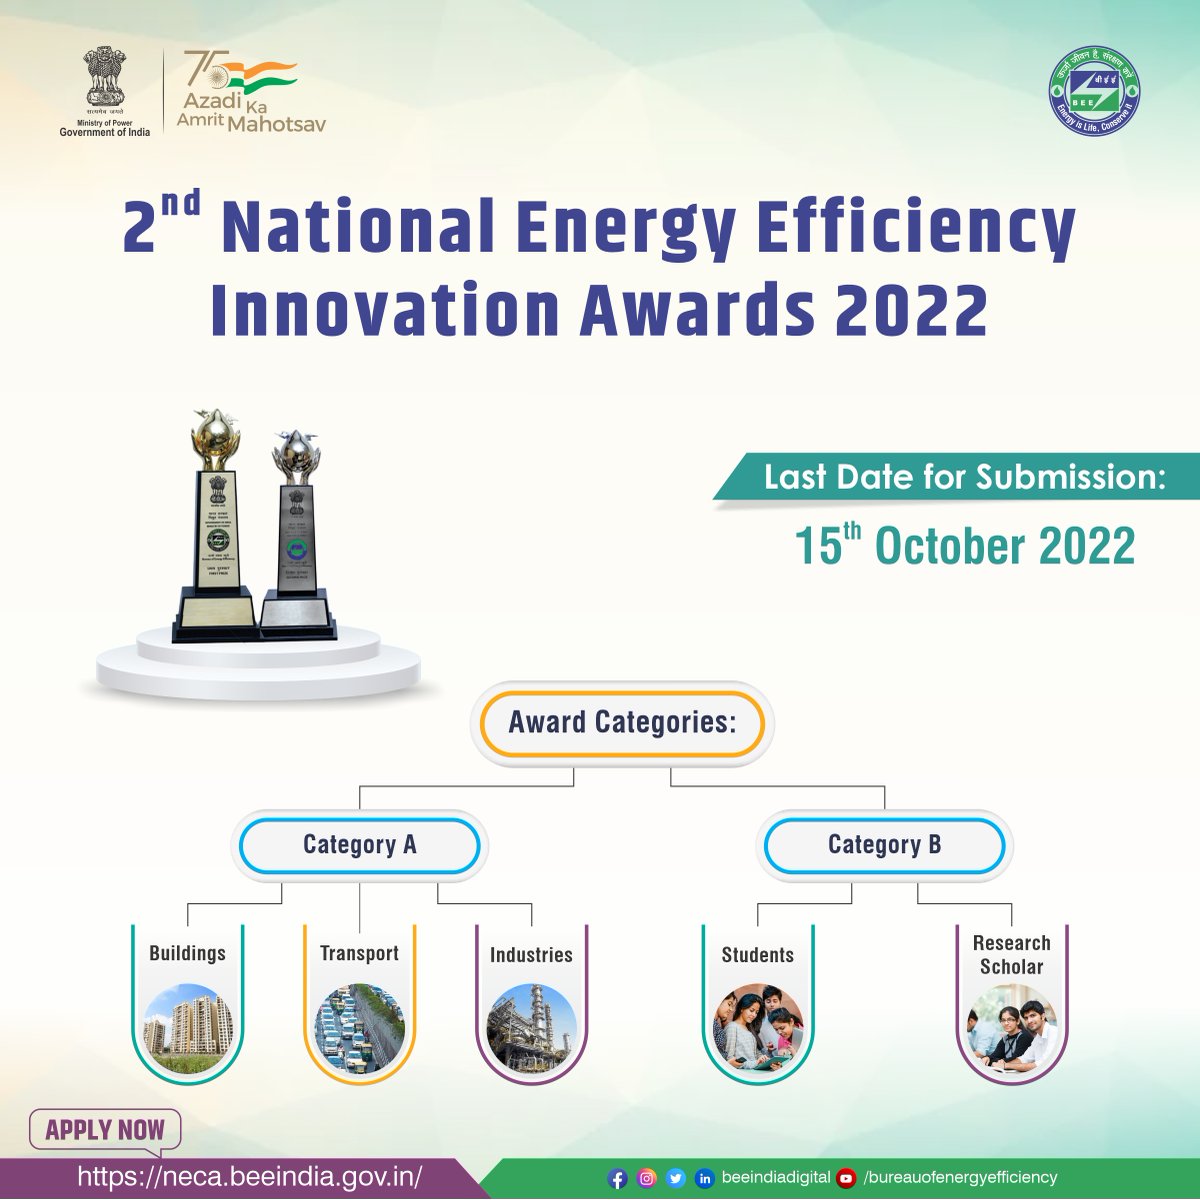 The National Energy Efficiency Innovation Award 2022 recognizes innovative #energyefficiency technologies & instil a sense of competition to motivate industries & sectors to develop innovative energy efficiency efforts in their units.
To Apply: neca.beeindia.gov.in
#NEEIA2022